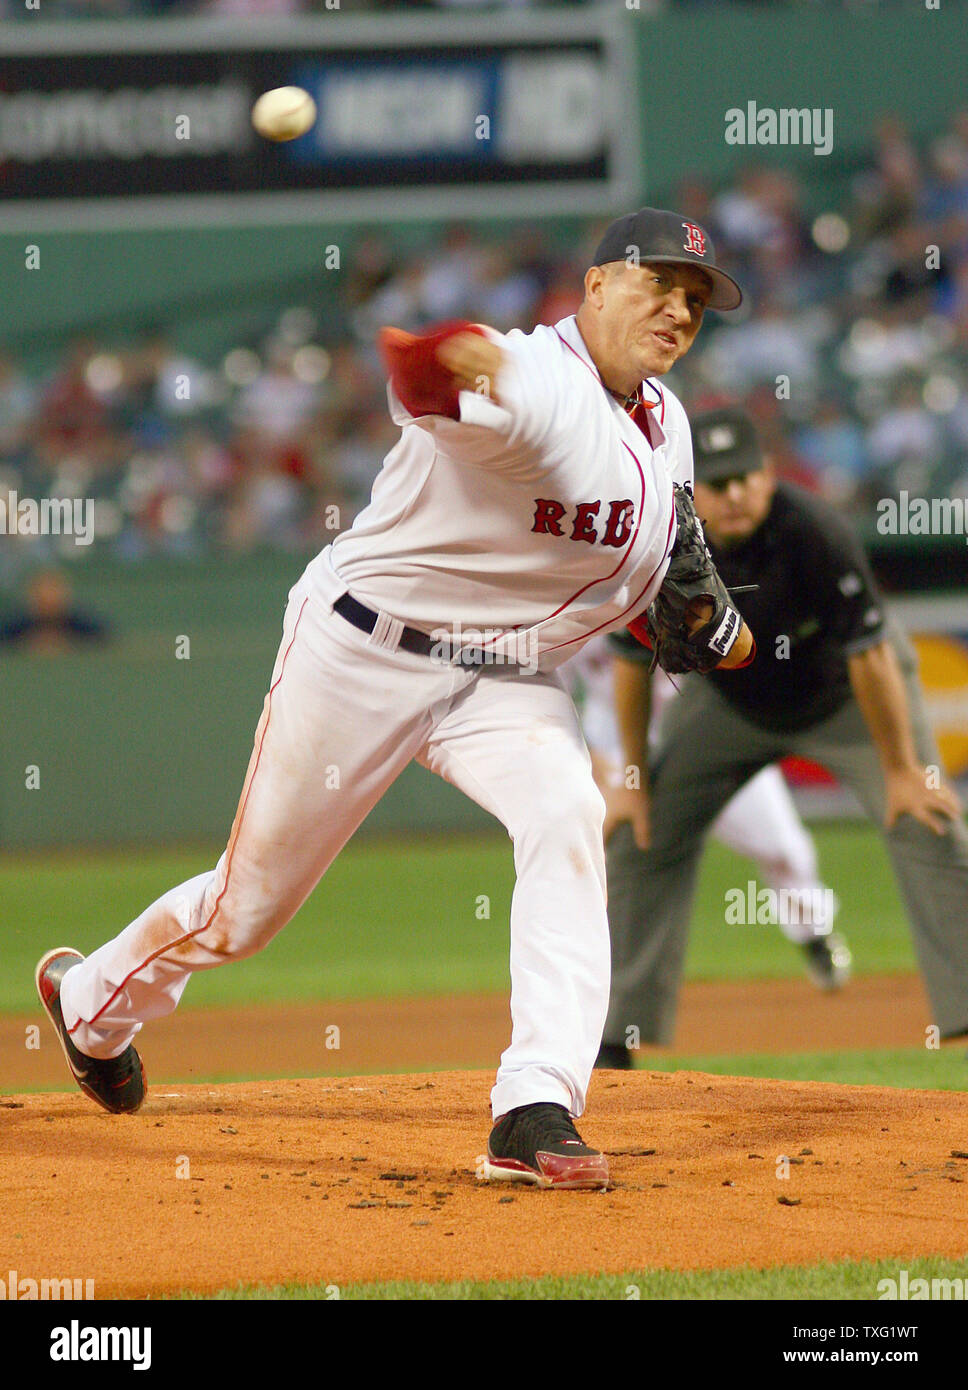 Boston Red Sox pitcher Julian Tavarez starts against the Toronto Blue Jays during the first of a four game series at Fenway Park in Boston on August 31, 2006. (UPI Photo/Katie McMahon) Stock Photo